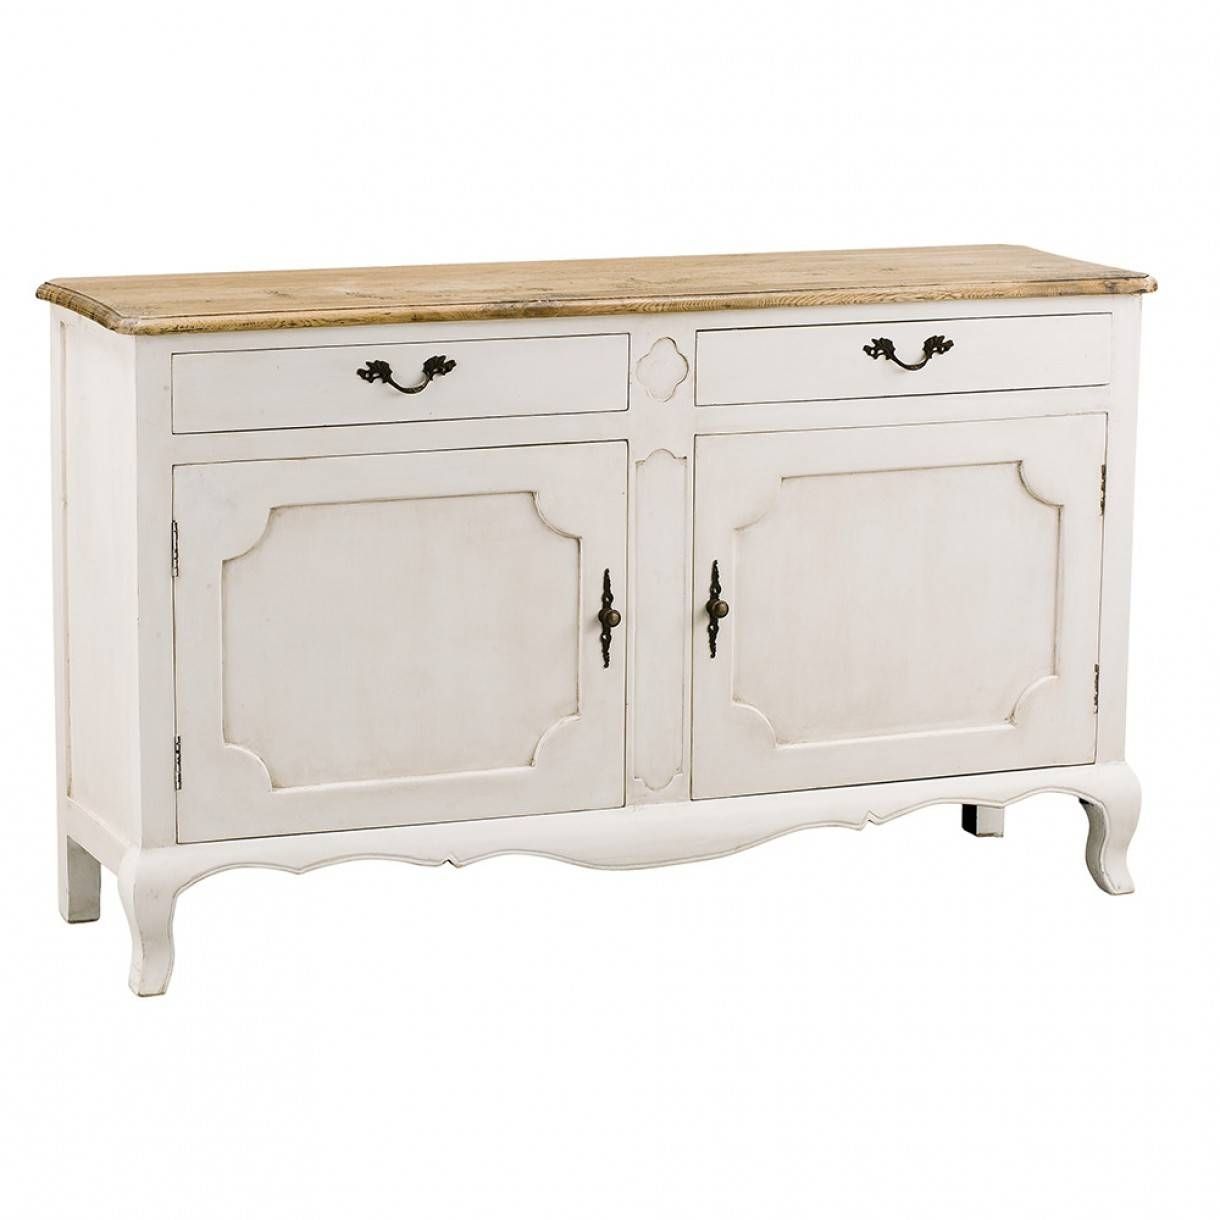 Oak Sideboard Distressed White Intended For Distressed Buffet Sideboards (View 9 of 15)